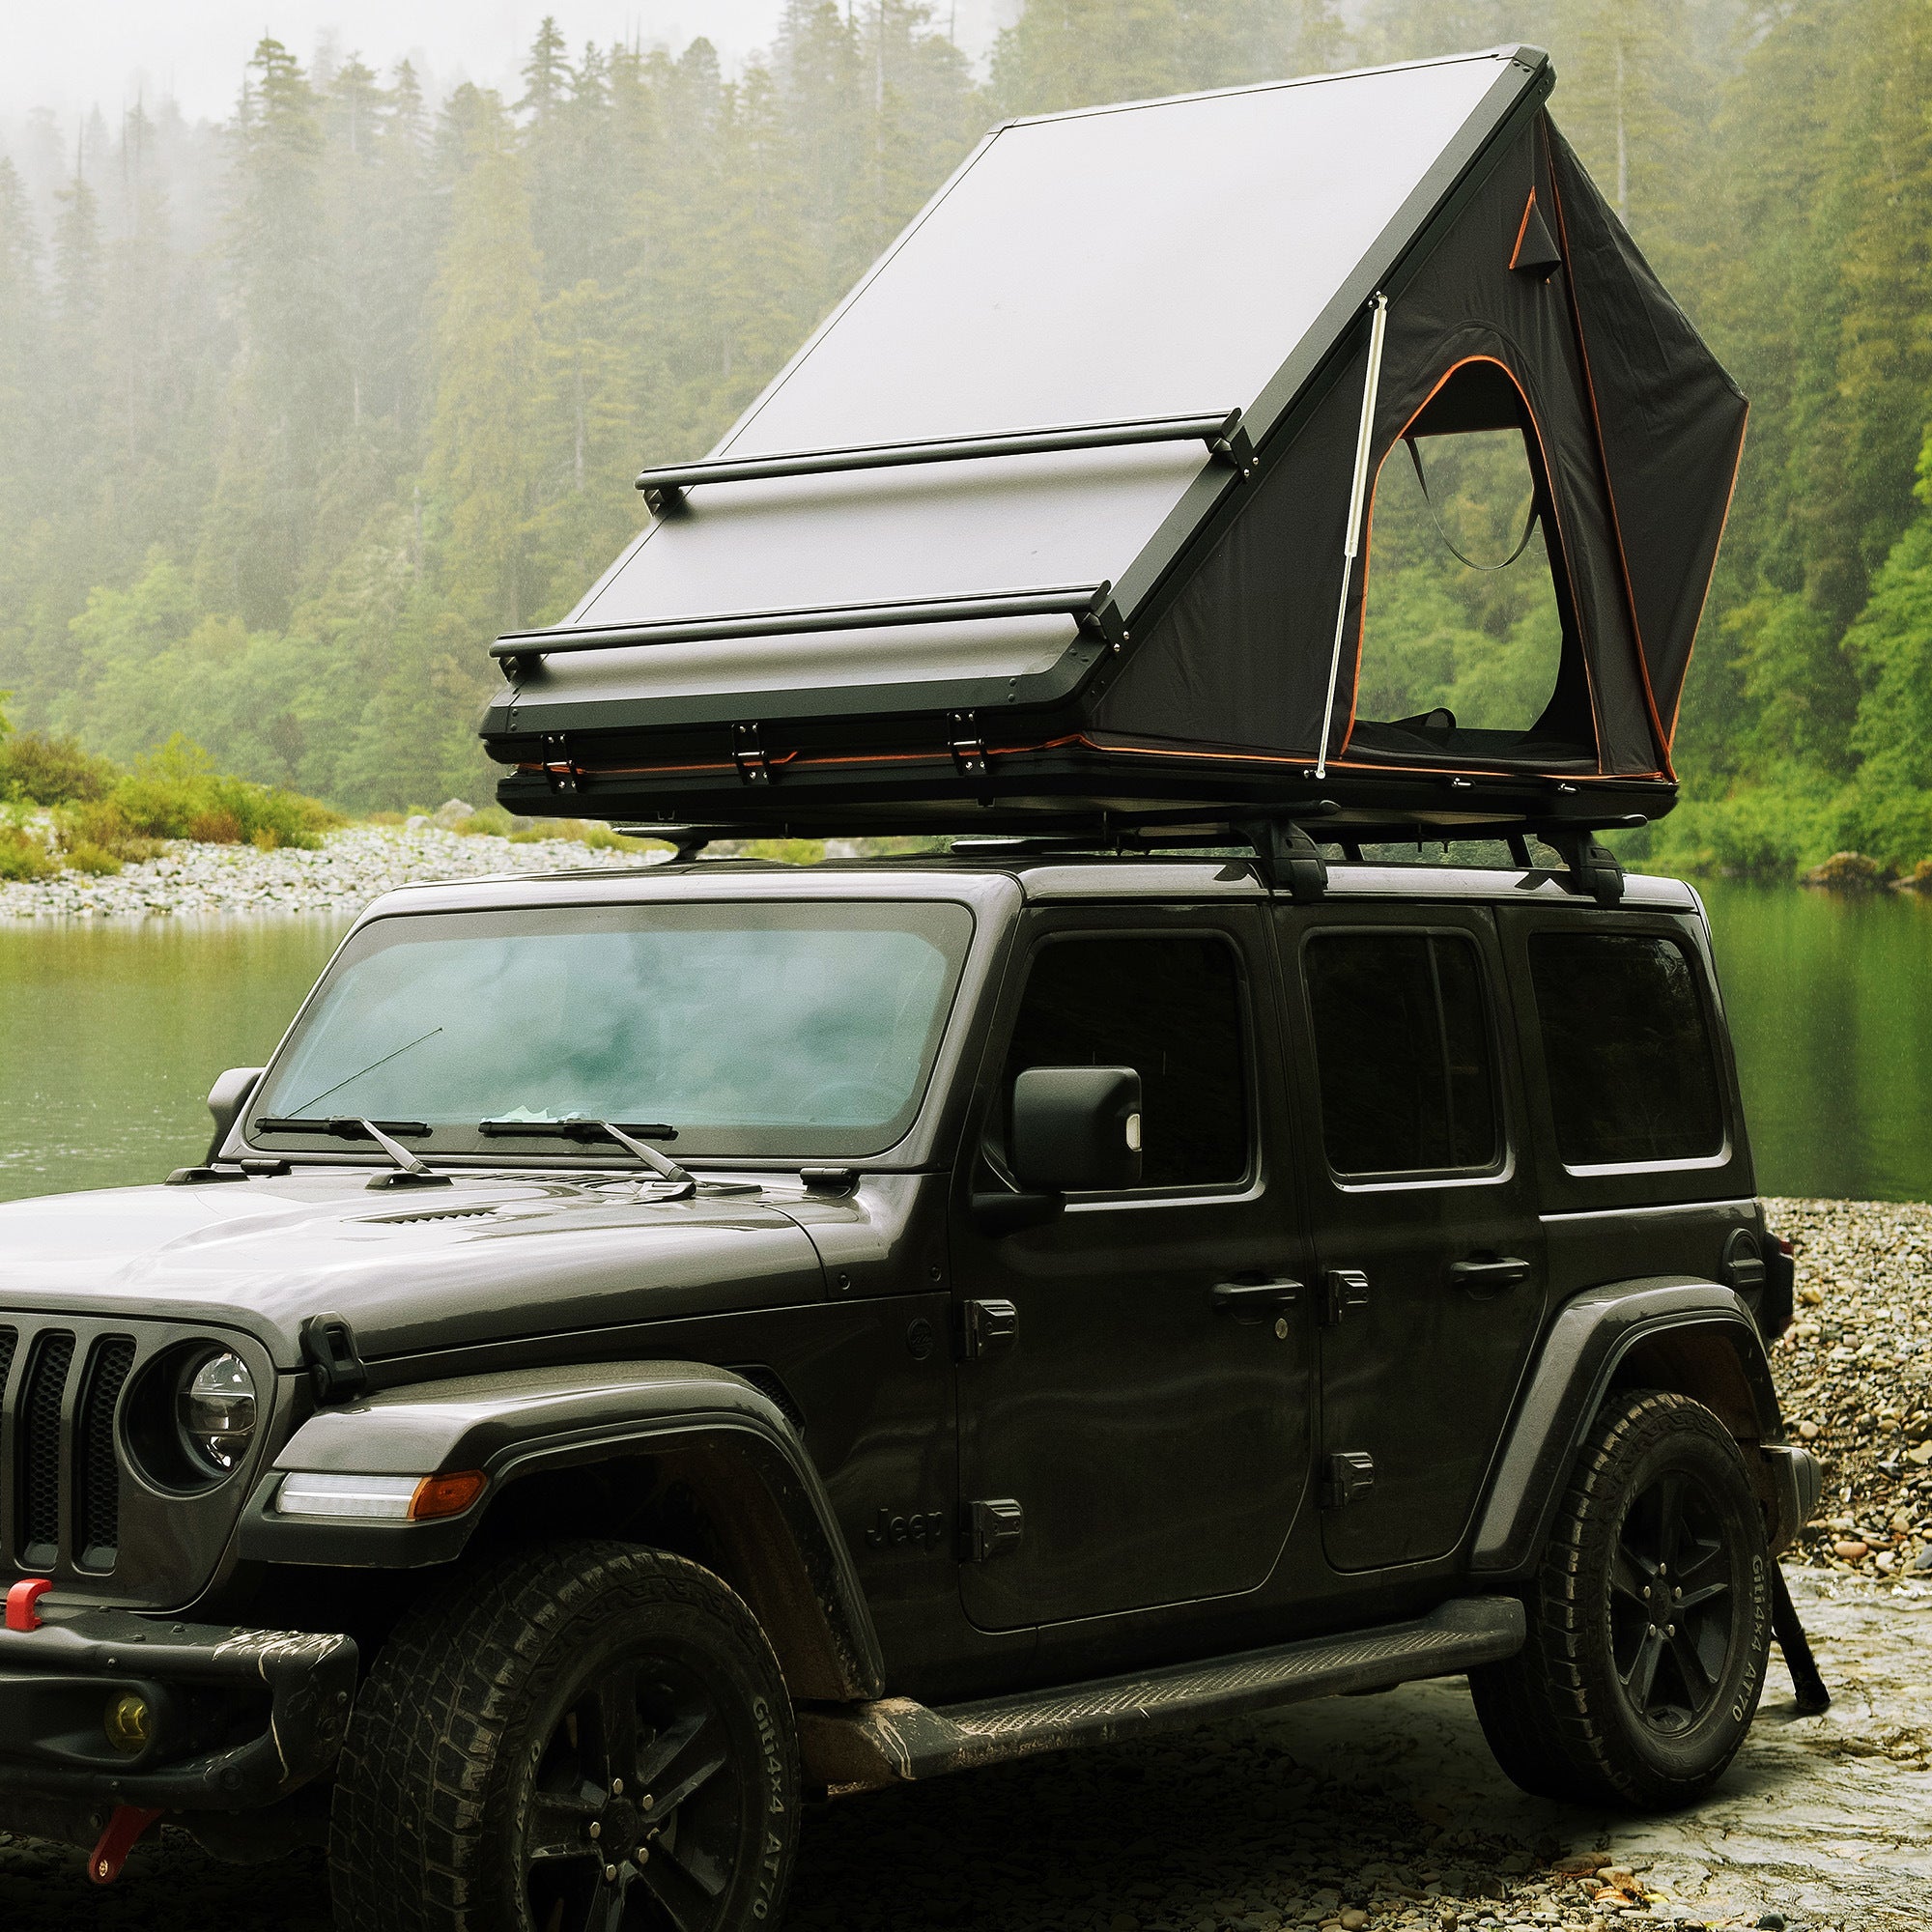 Trustmade Scout Plus Series - Triangular Hard Shell Rooftop Tent with Roof Rack assembled on truck with ladder at lake front view